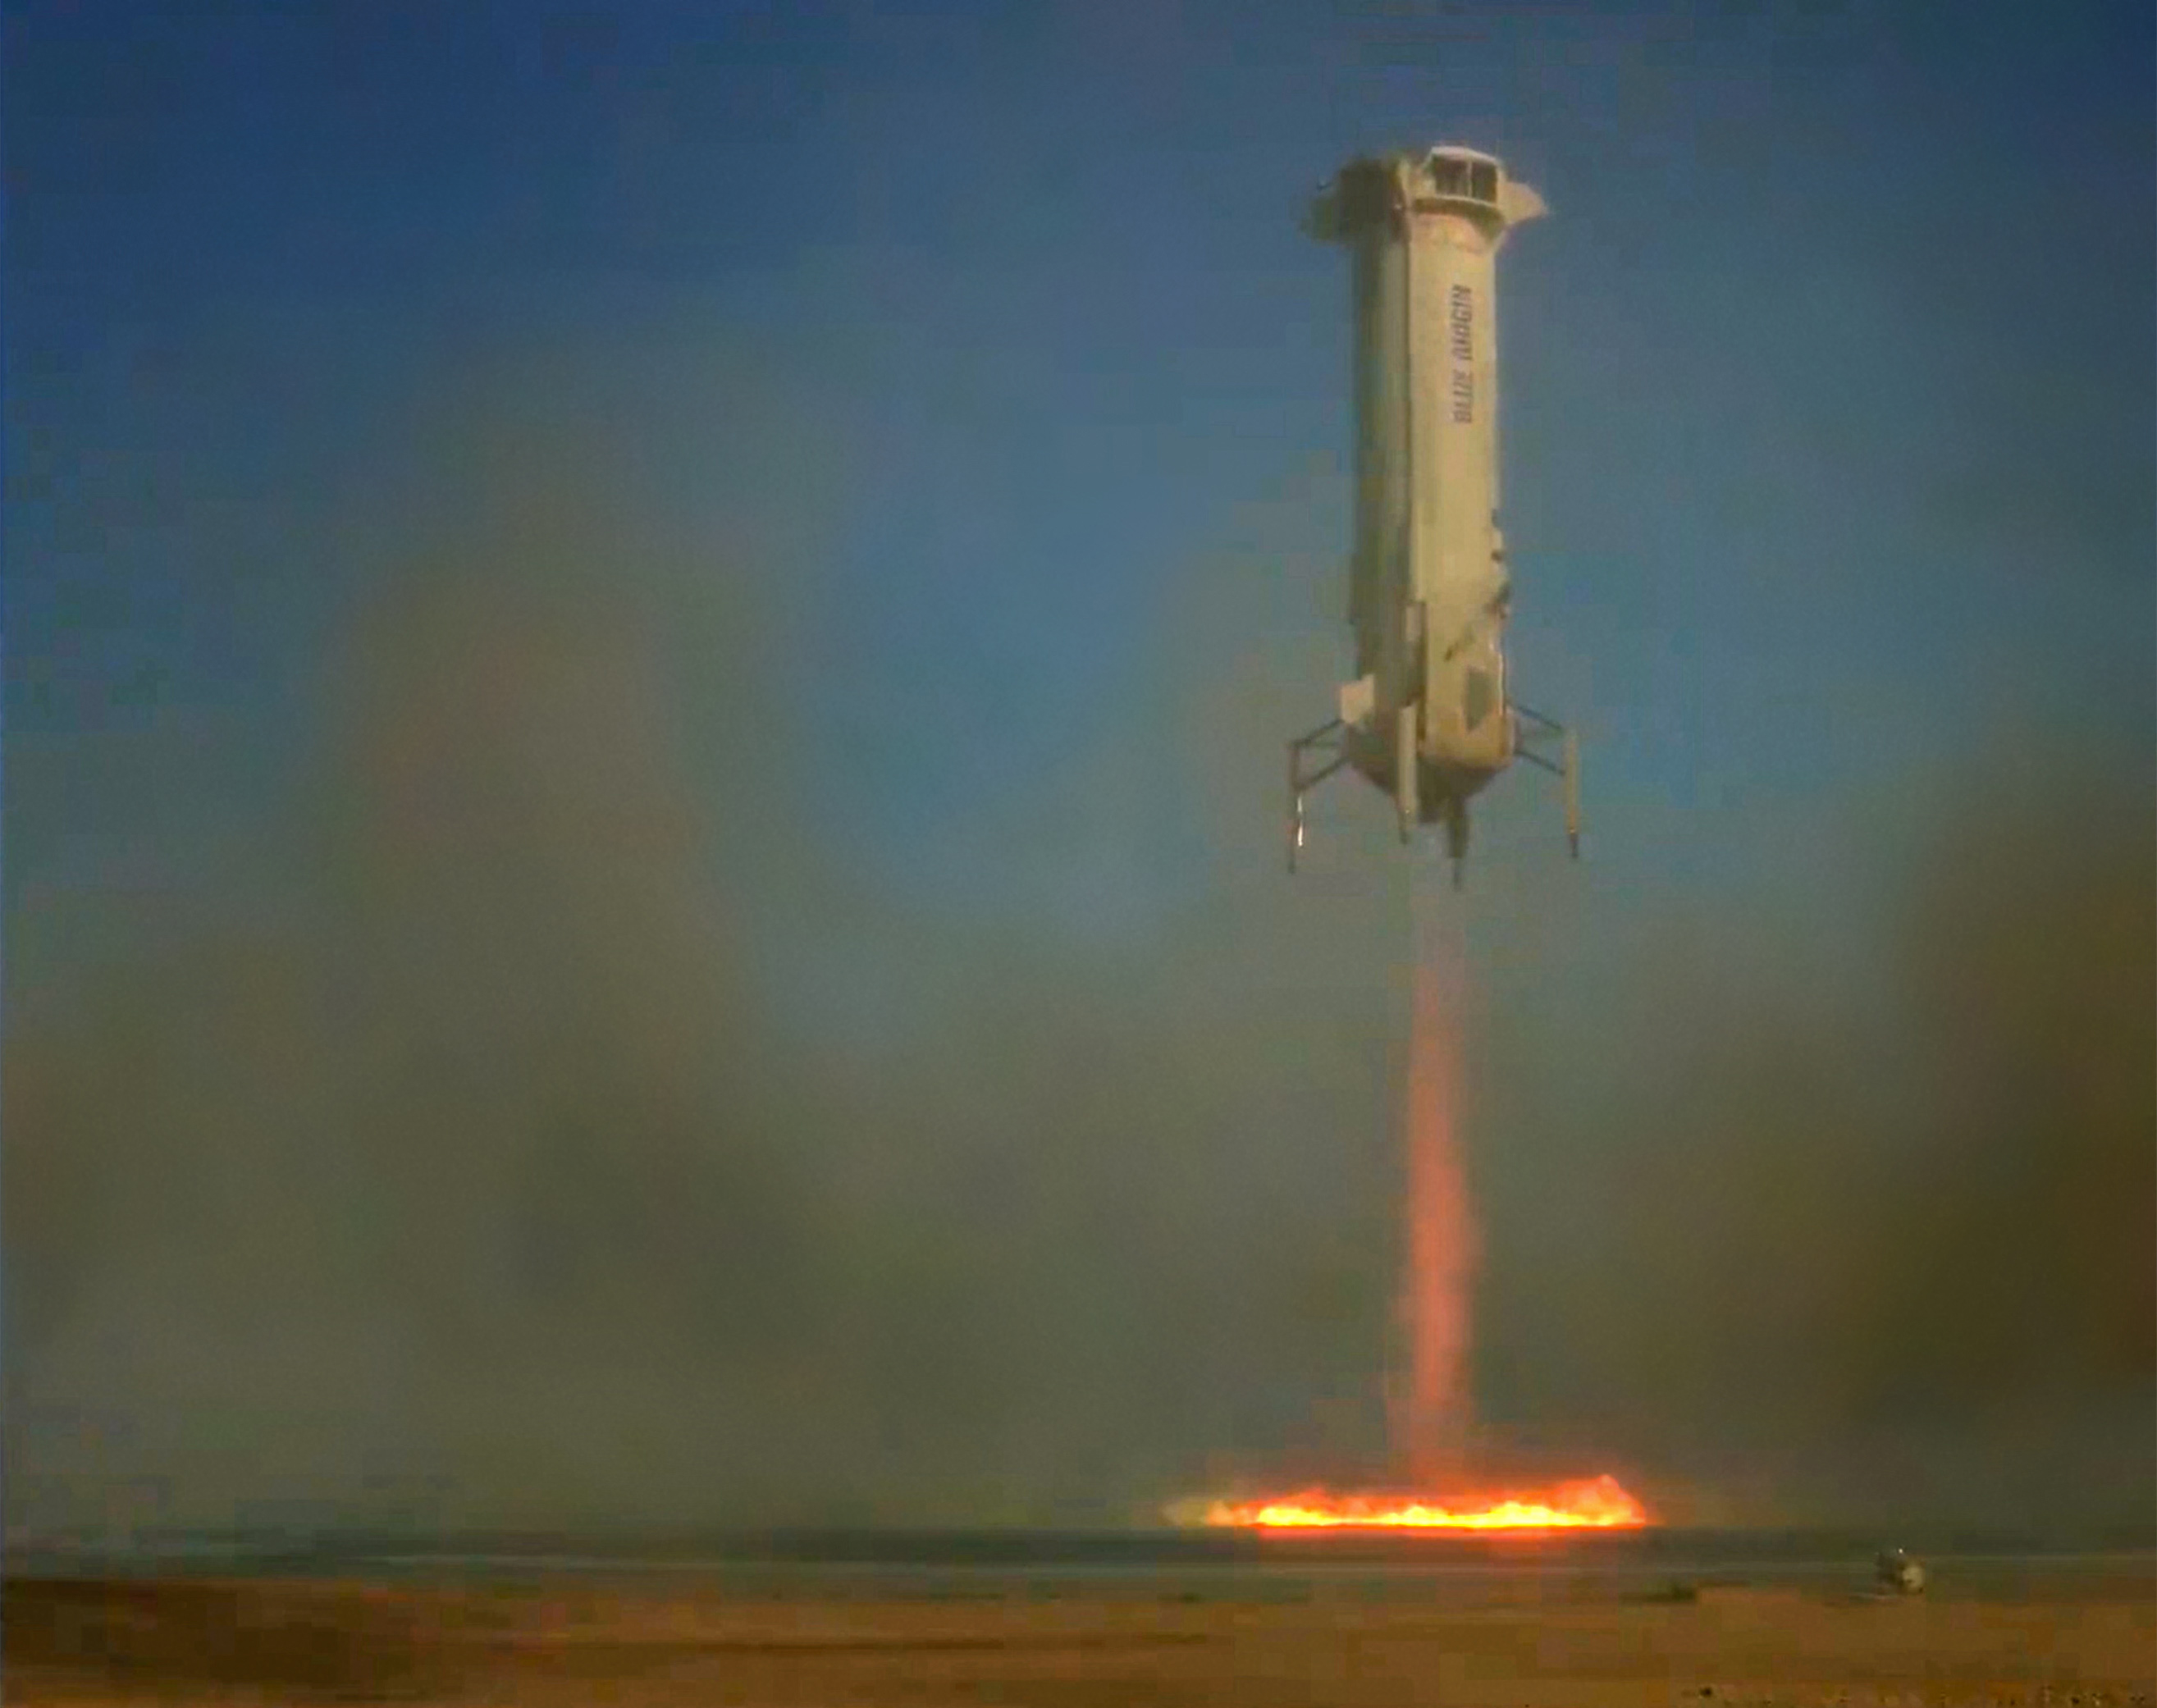 Blue Origin’s New Shepard rocket lands on its pad in West Texas after a successful flight on Oct. 13 that included two Johns Hopkins APL space instruments.  Credit: Blue Origin